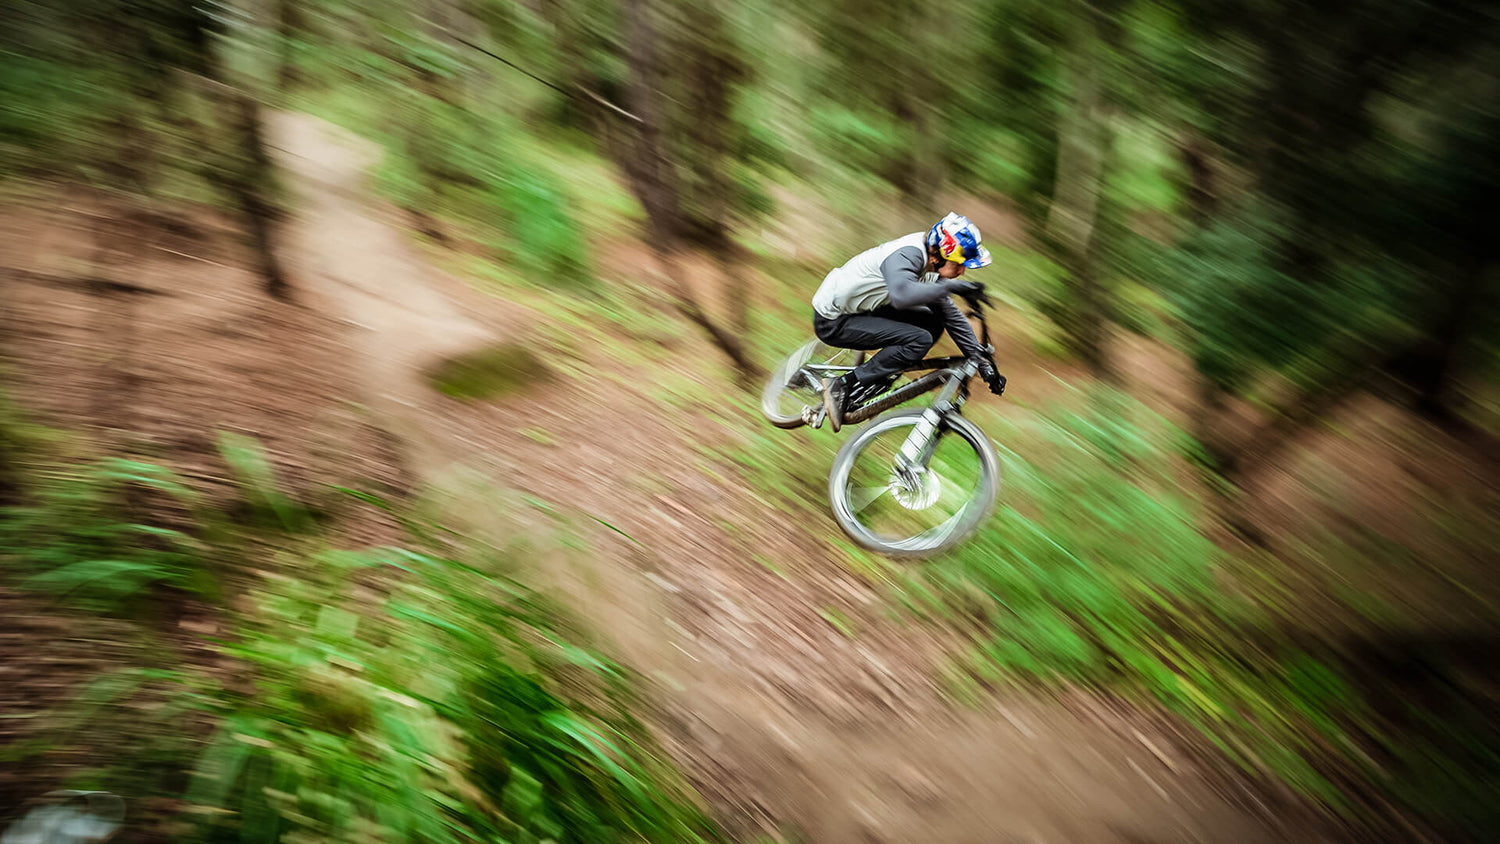 Troy Lee Designs Moutain bike rider, in the Ruckus collection, going down a hill